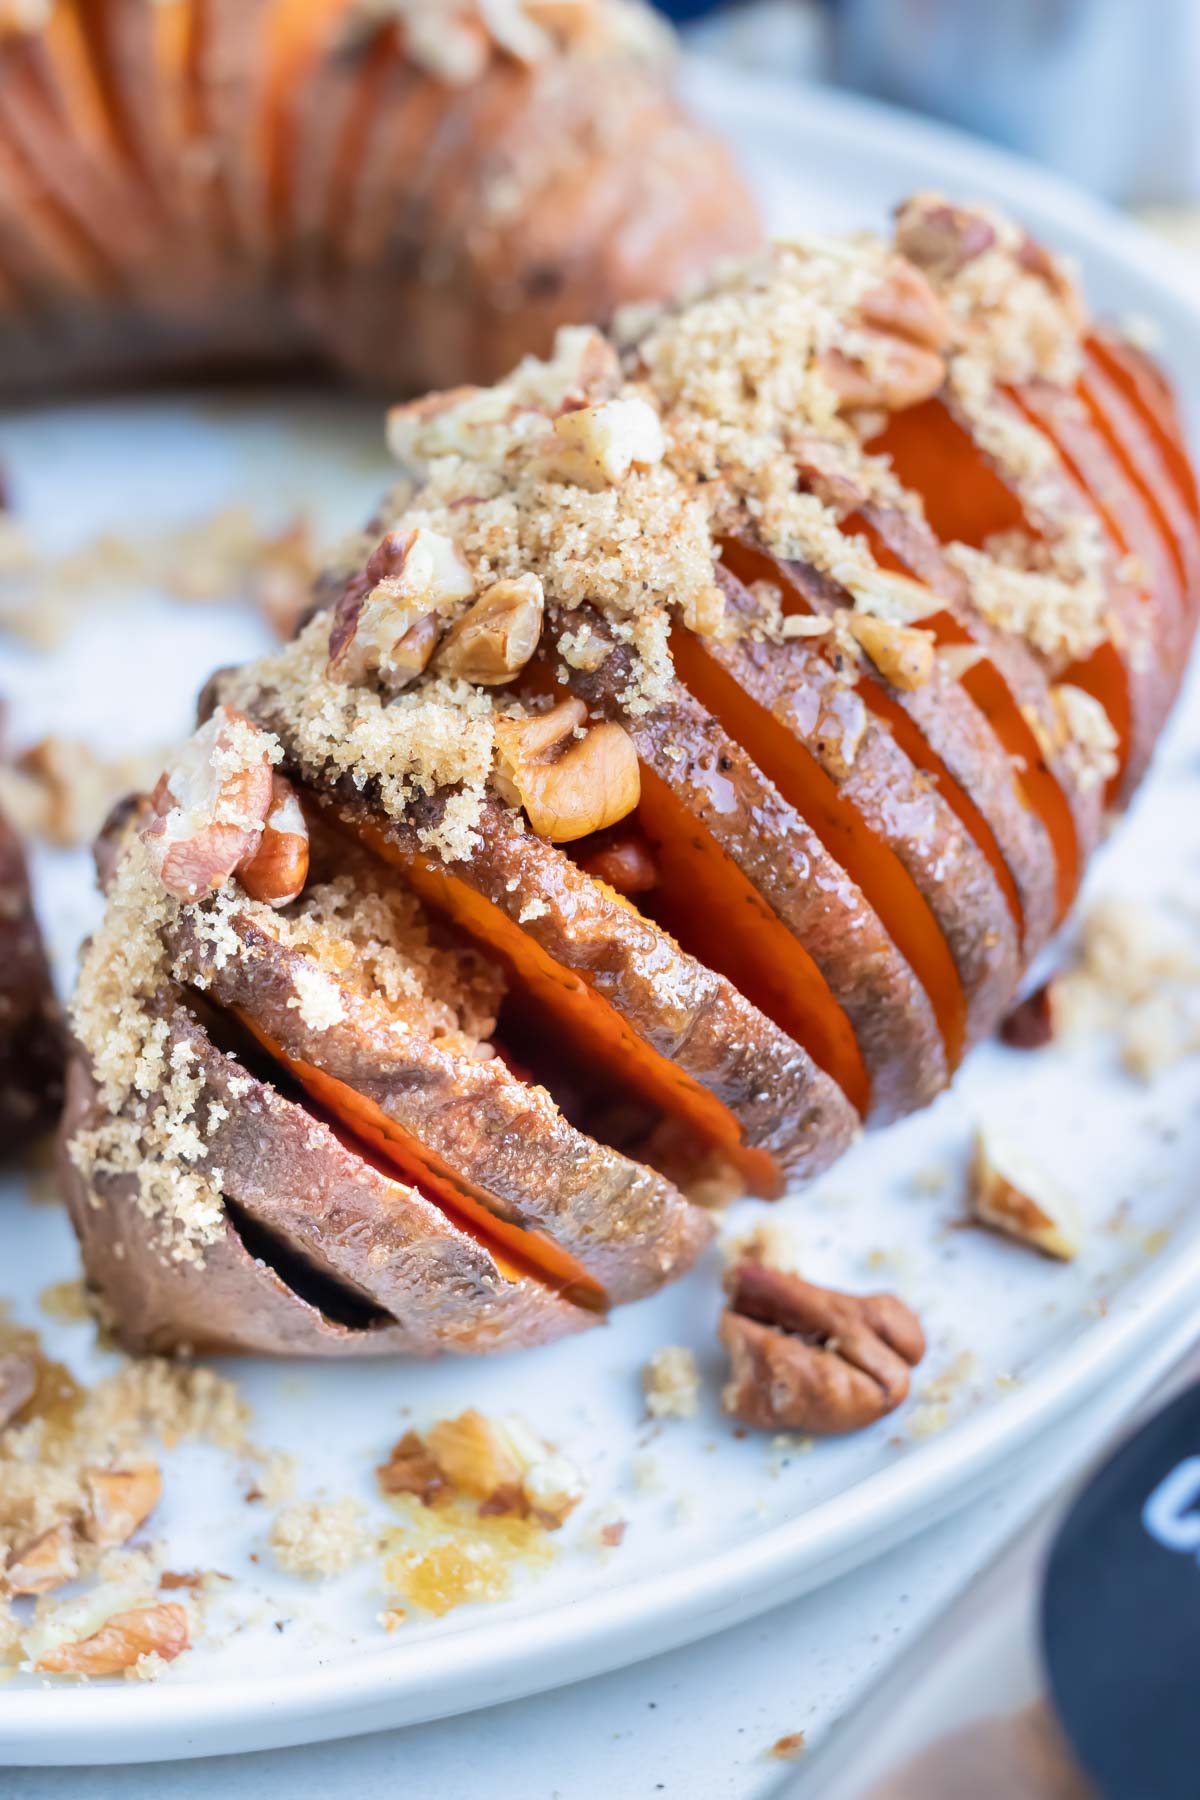 Baked hasselback sweet potatoes have all the flavors of your favorite Thanksgiving casserole.